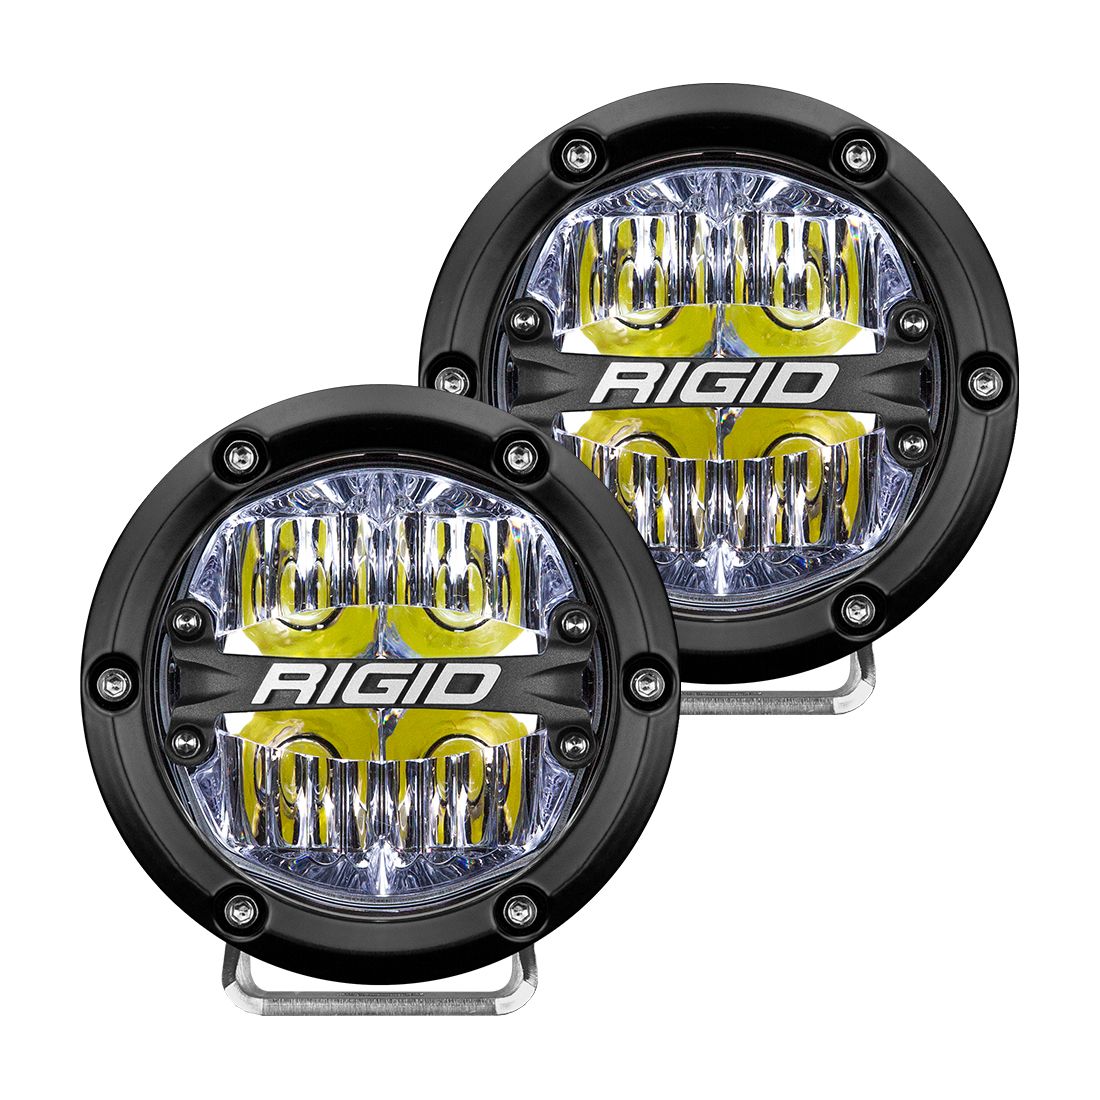 Rigid 36117 360-Series 4 Inch LED Off-Road Drive Optic with White Backlight Pair - BumperStock